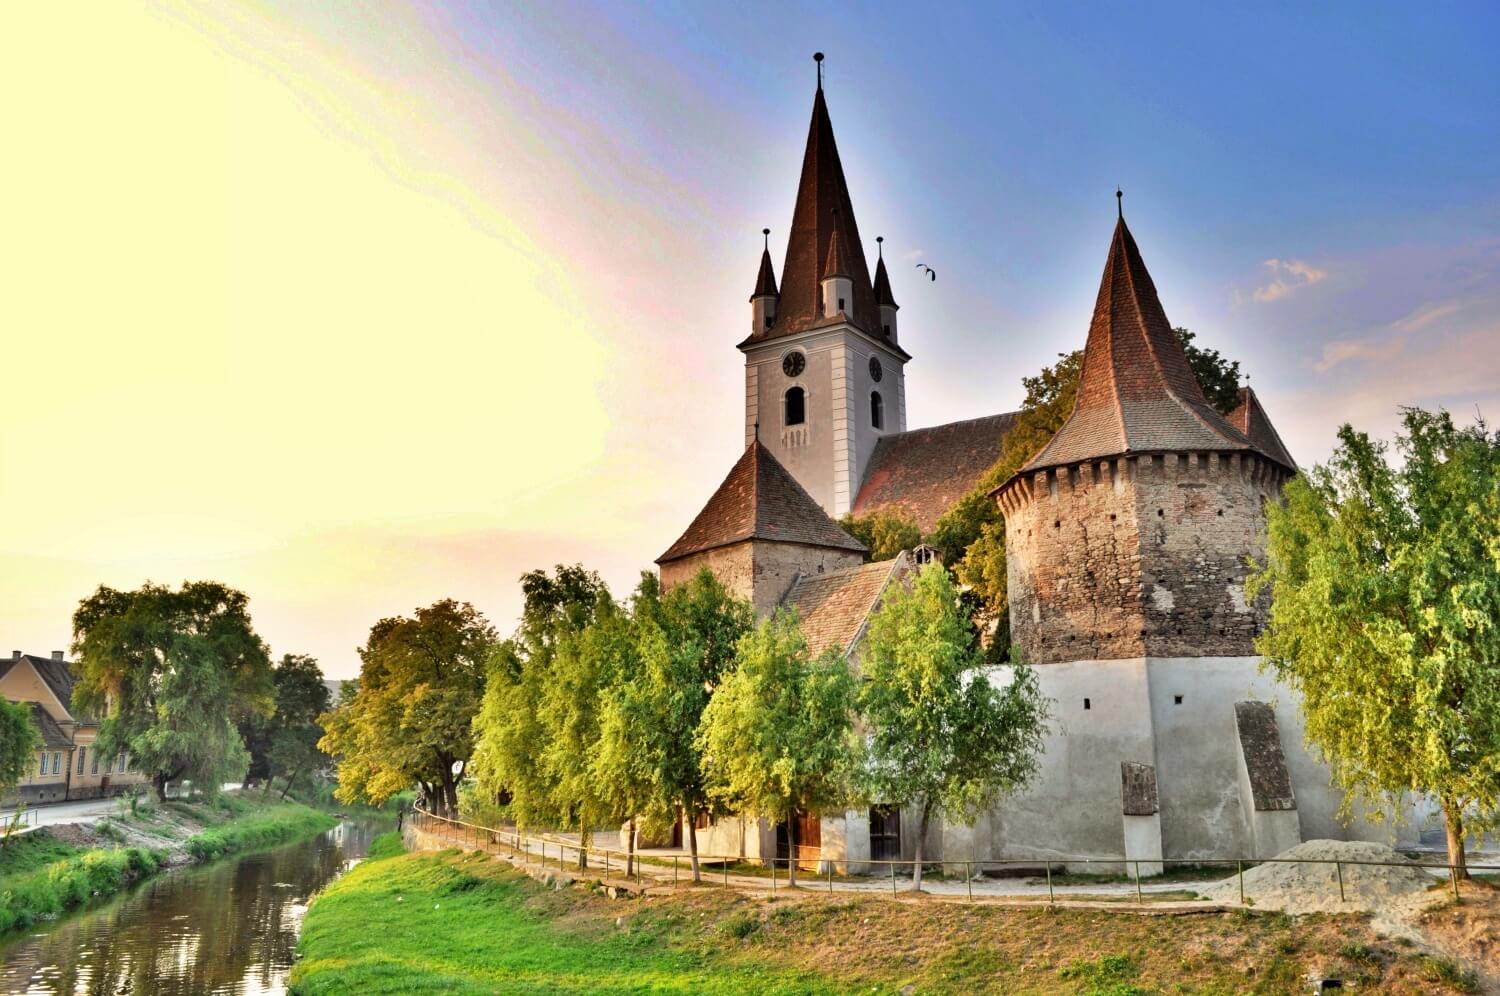 The fortified church from Cristian